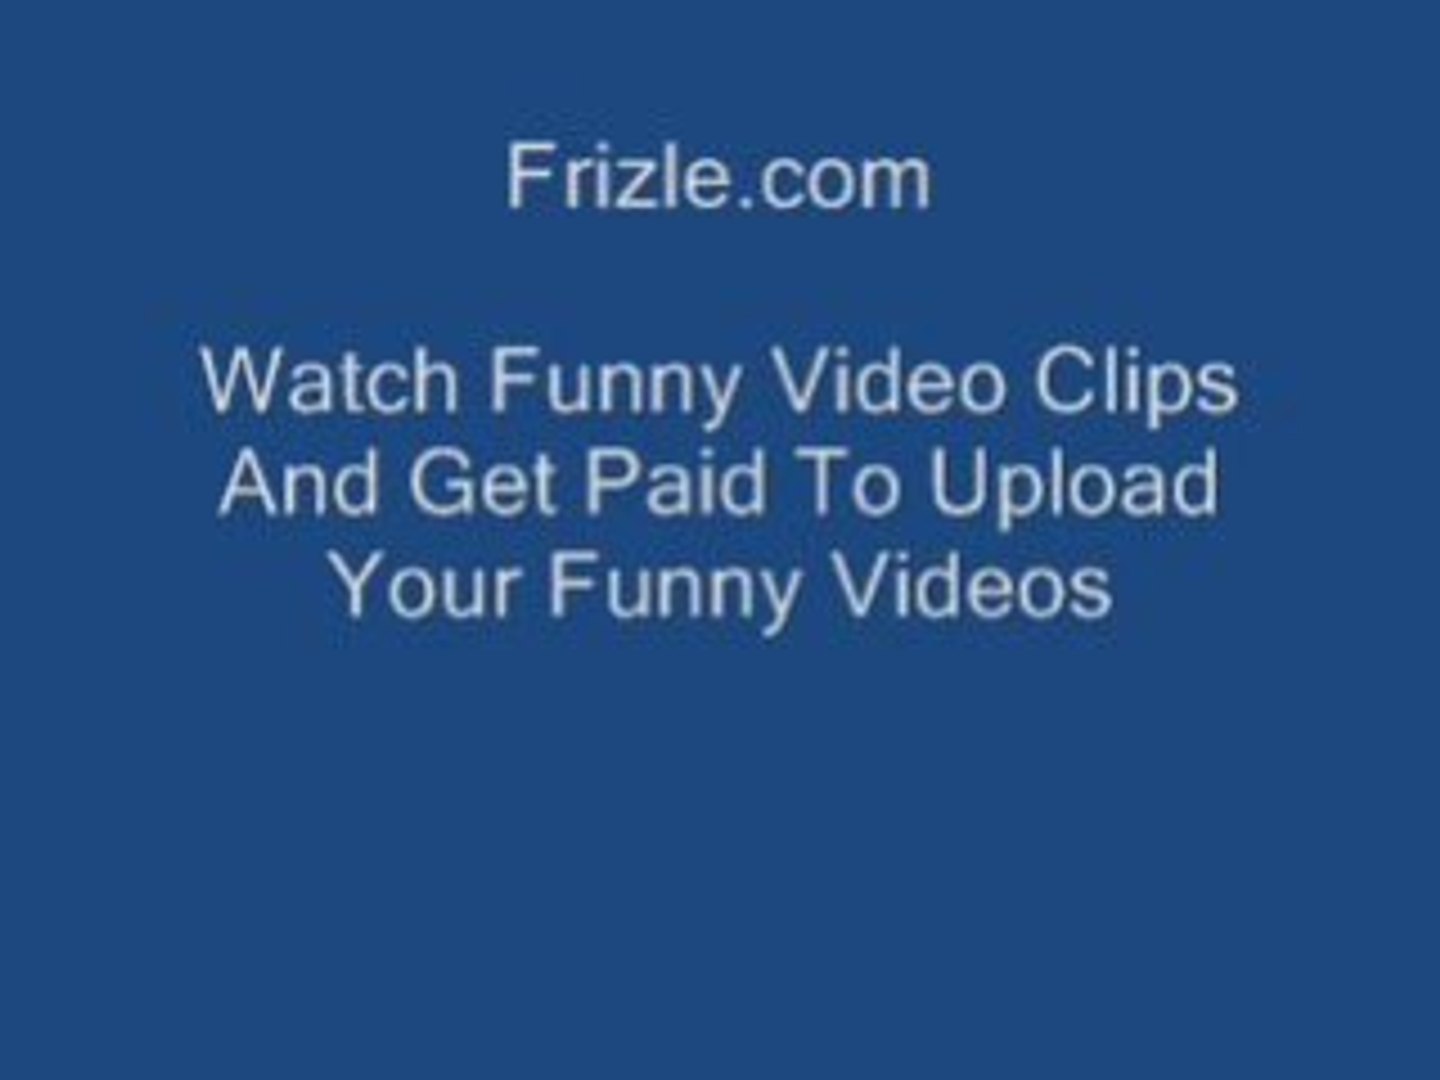 Free Video Clips-Funny Videos-Free Music Video Clips